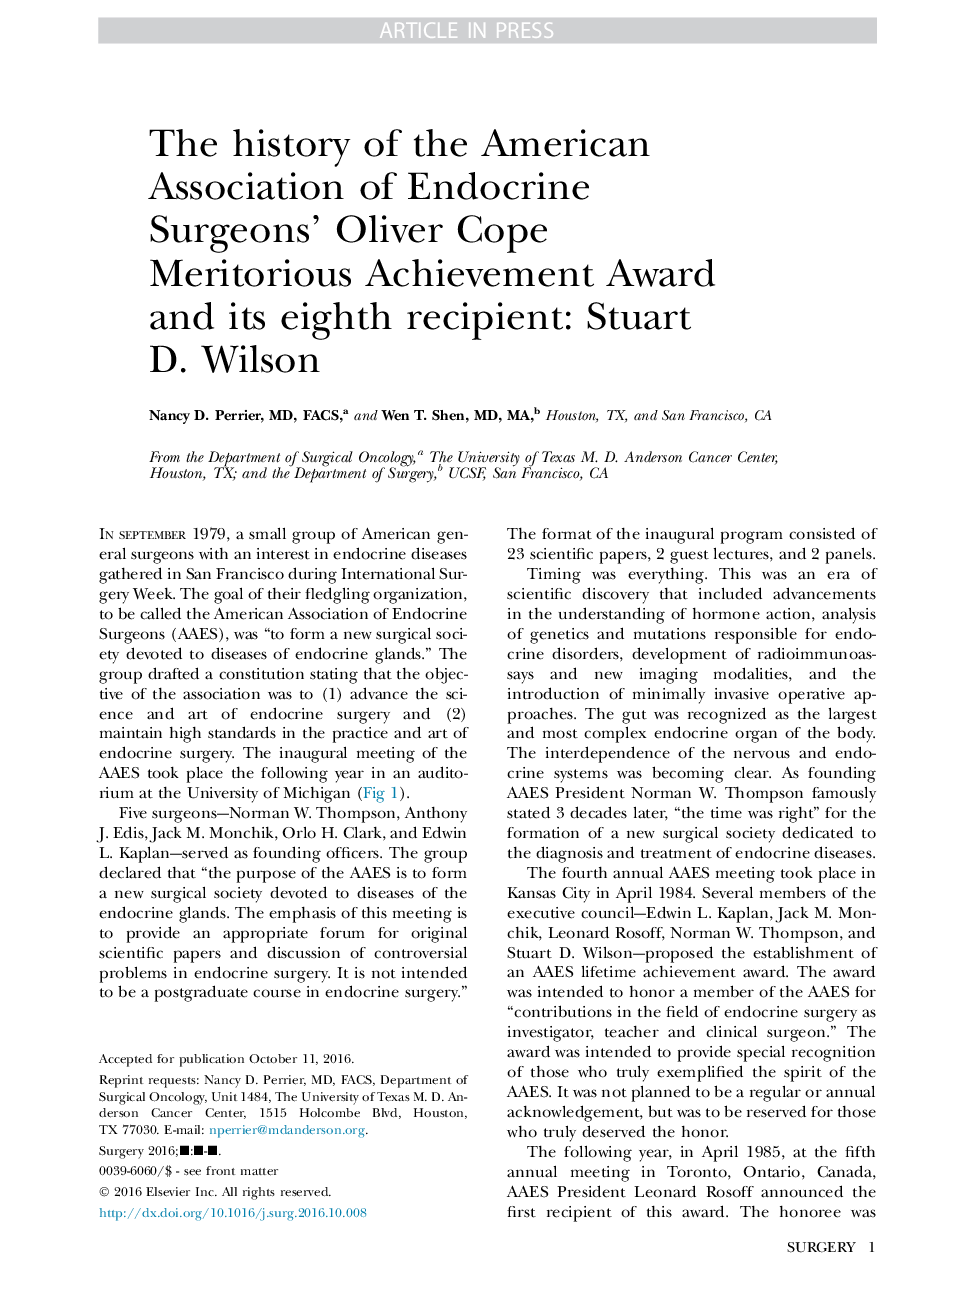 The history of the American Association of Endocrine Surgeons' Oliver Cope Meritorious Achievement Award and its eighth recipient: Stuart D. Wilson